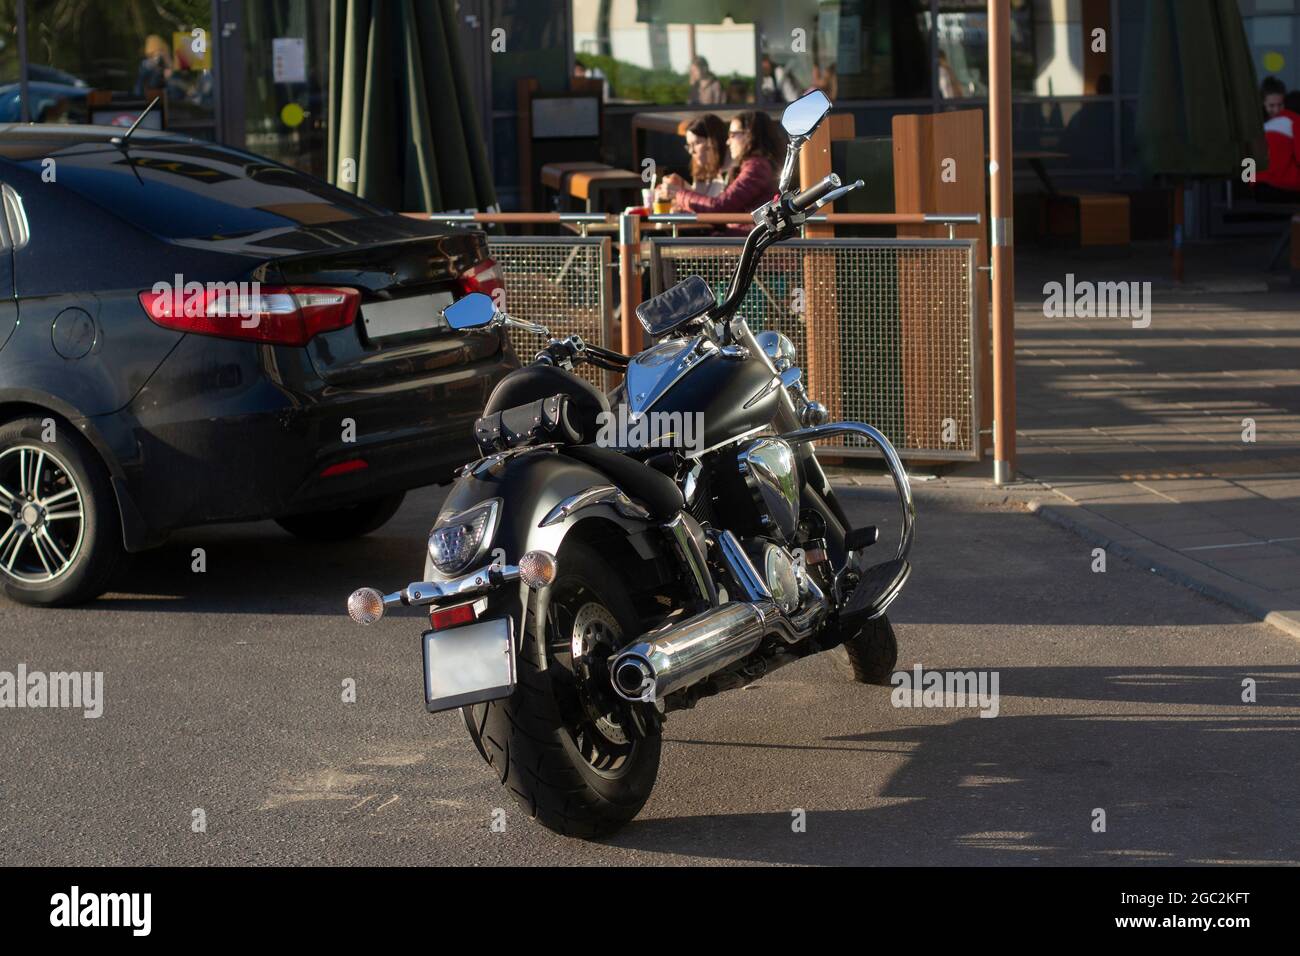 A motorcycle in the parking lot. The motorcycle is on the street. Two wheeled vehicles on a petrol engine. Classic transport for a man. Stock Photo